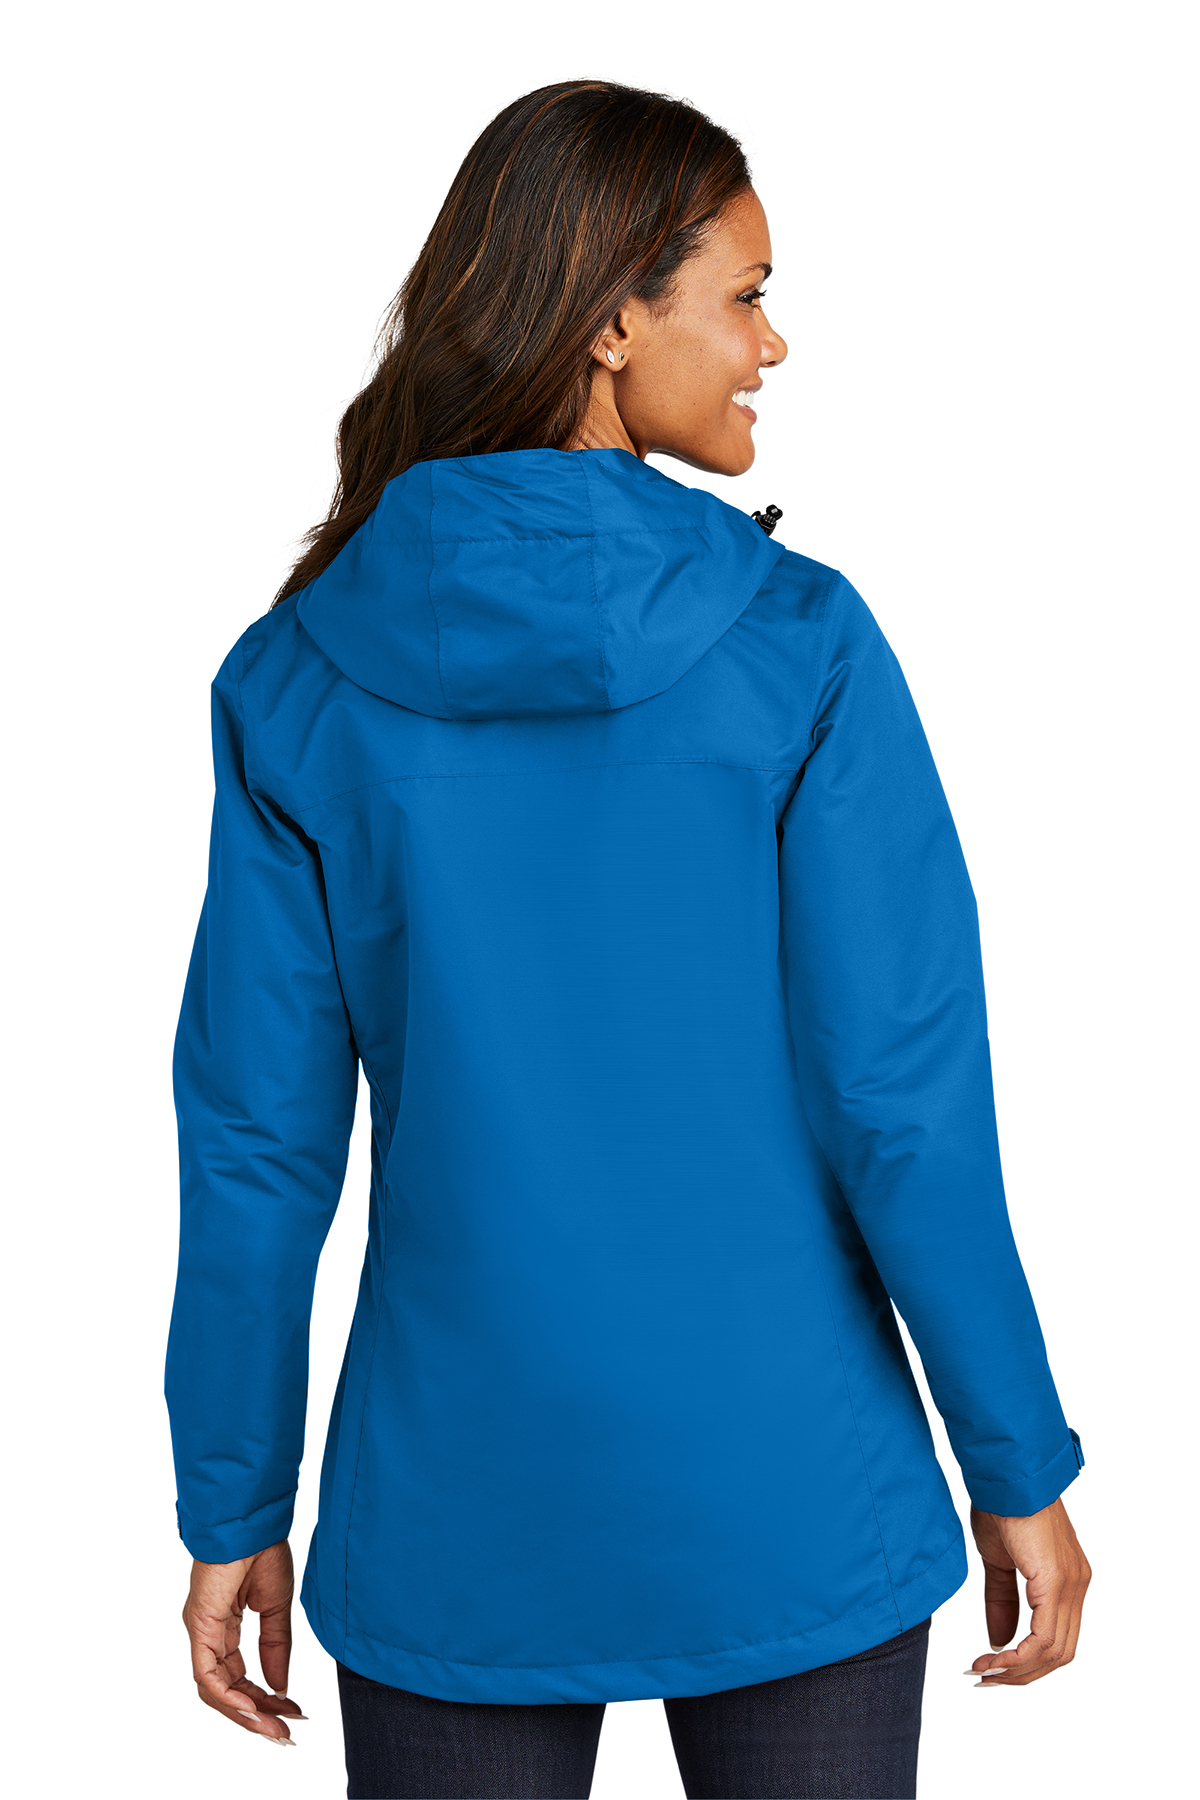 Product Jacket | All-Conditions Ladies SanMar | Port Authority